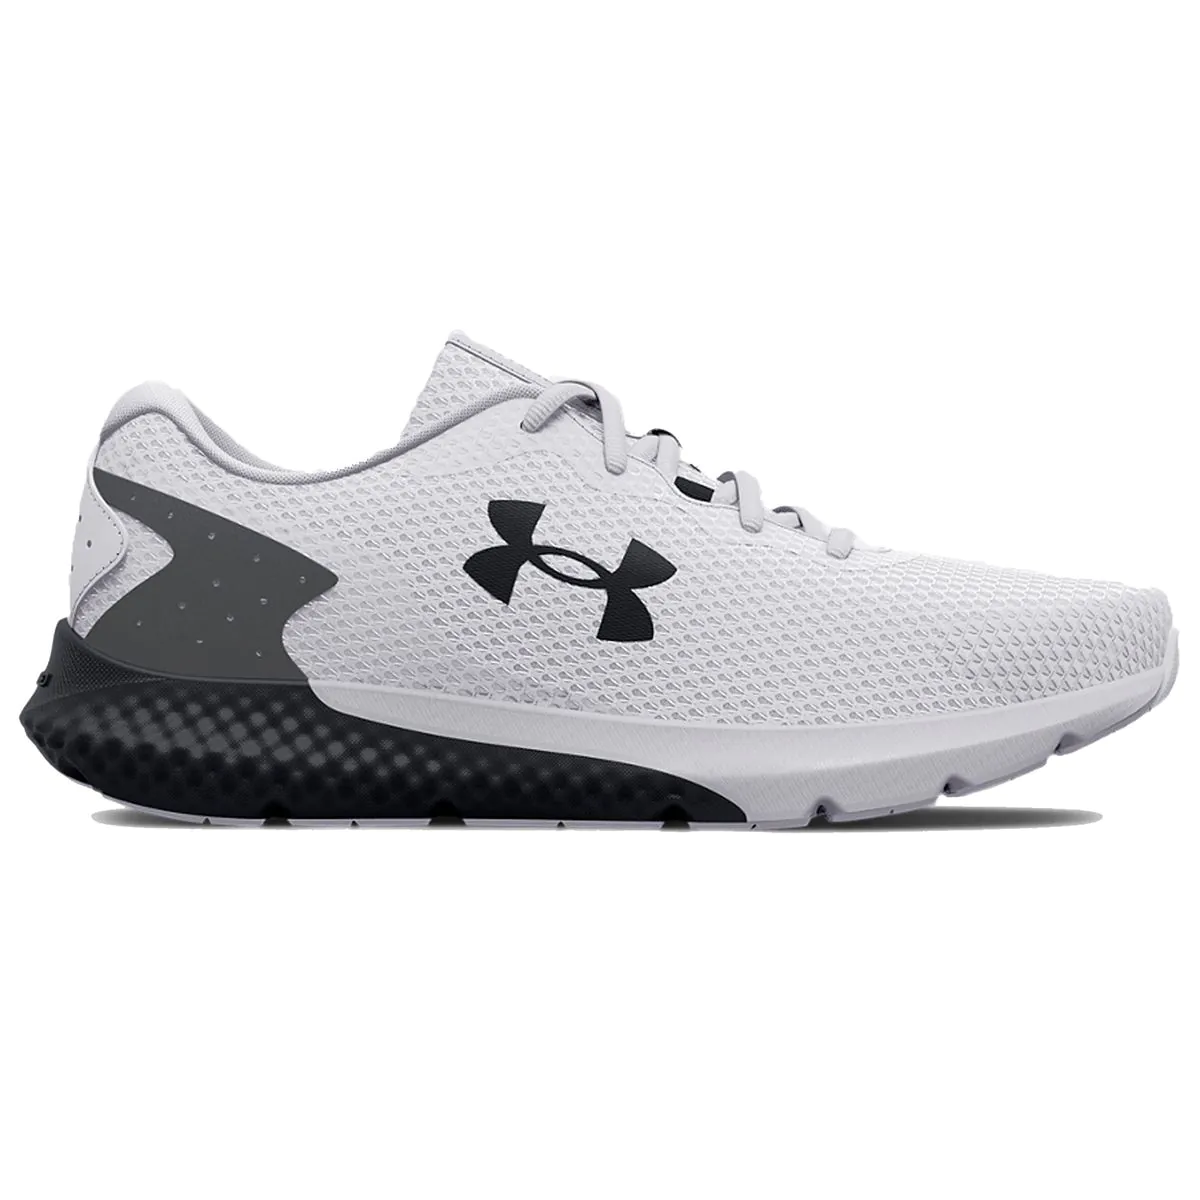 ZAPATOS UNDER ARMOUR CHARGED ROGUE 3 NEGRO 3024877 102 